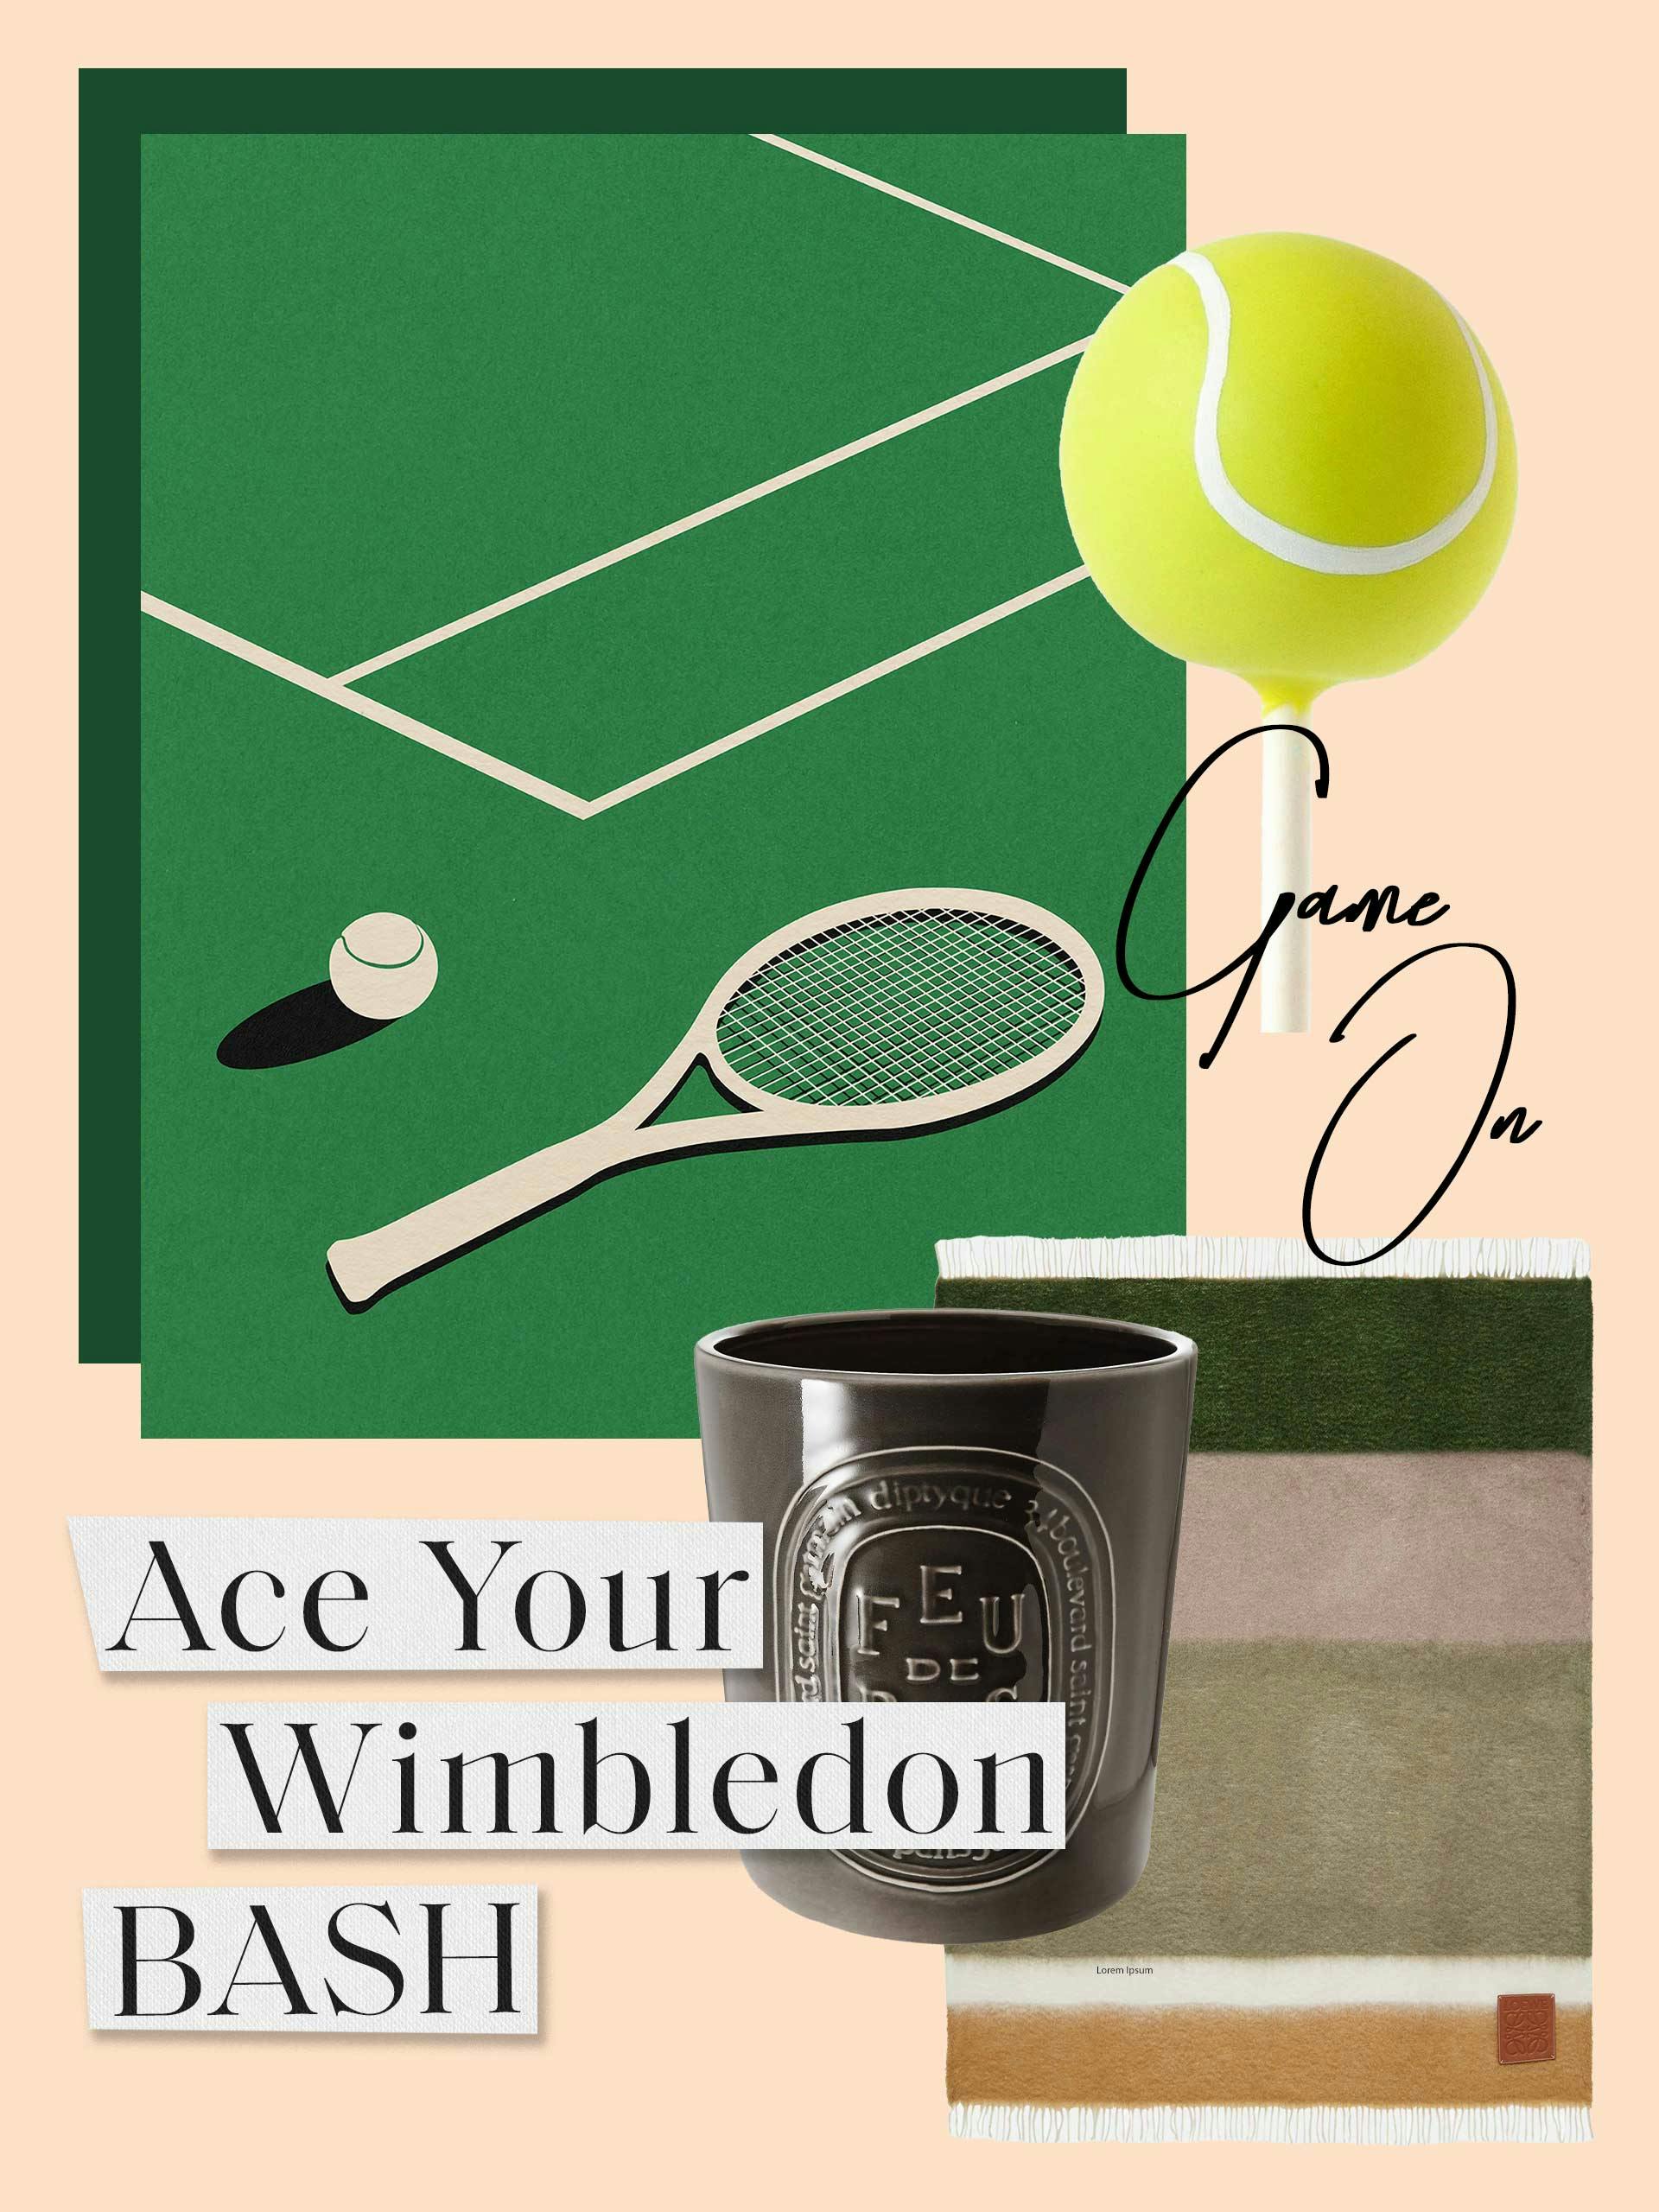 point-of-view-holding-wimbledon-hosting